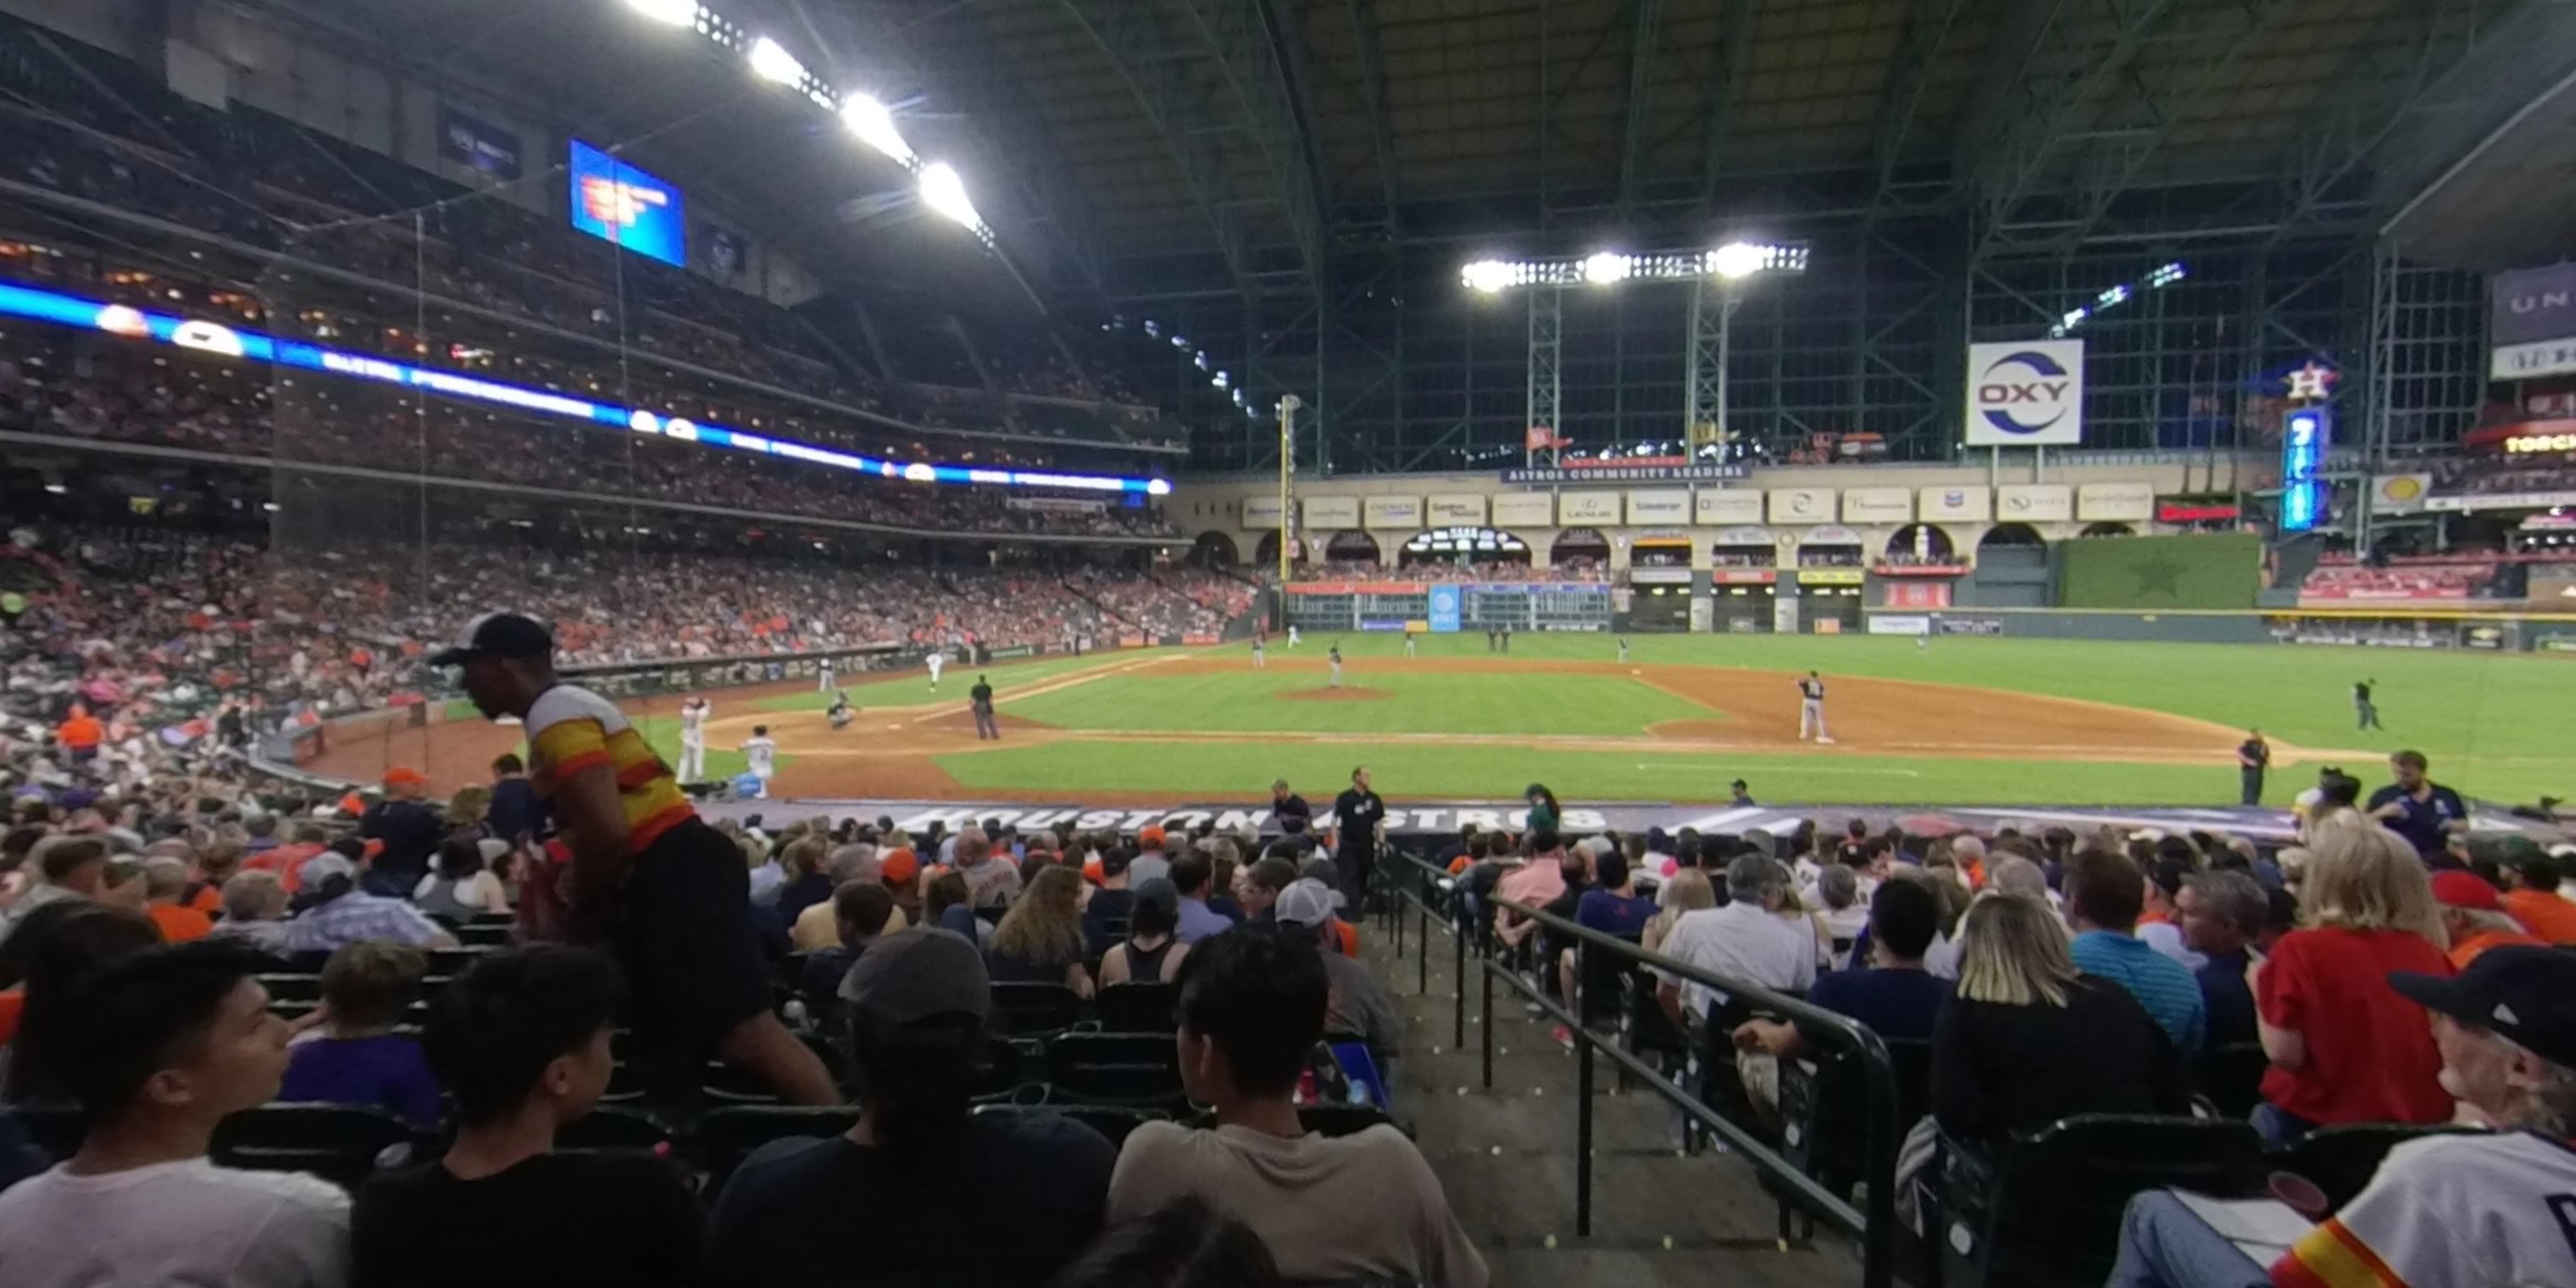 section 124 panoramic seat view  for baseball - minute maid park